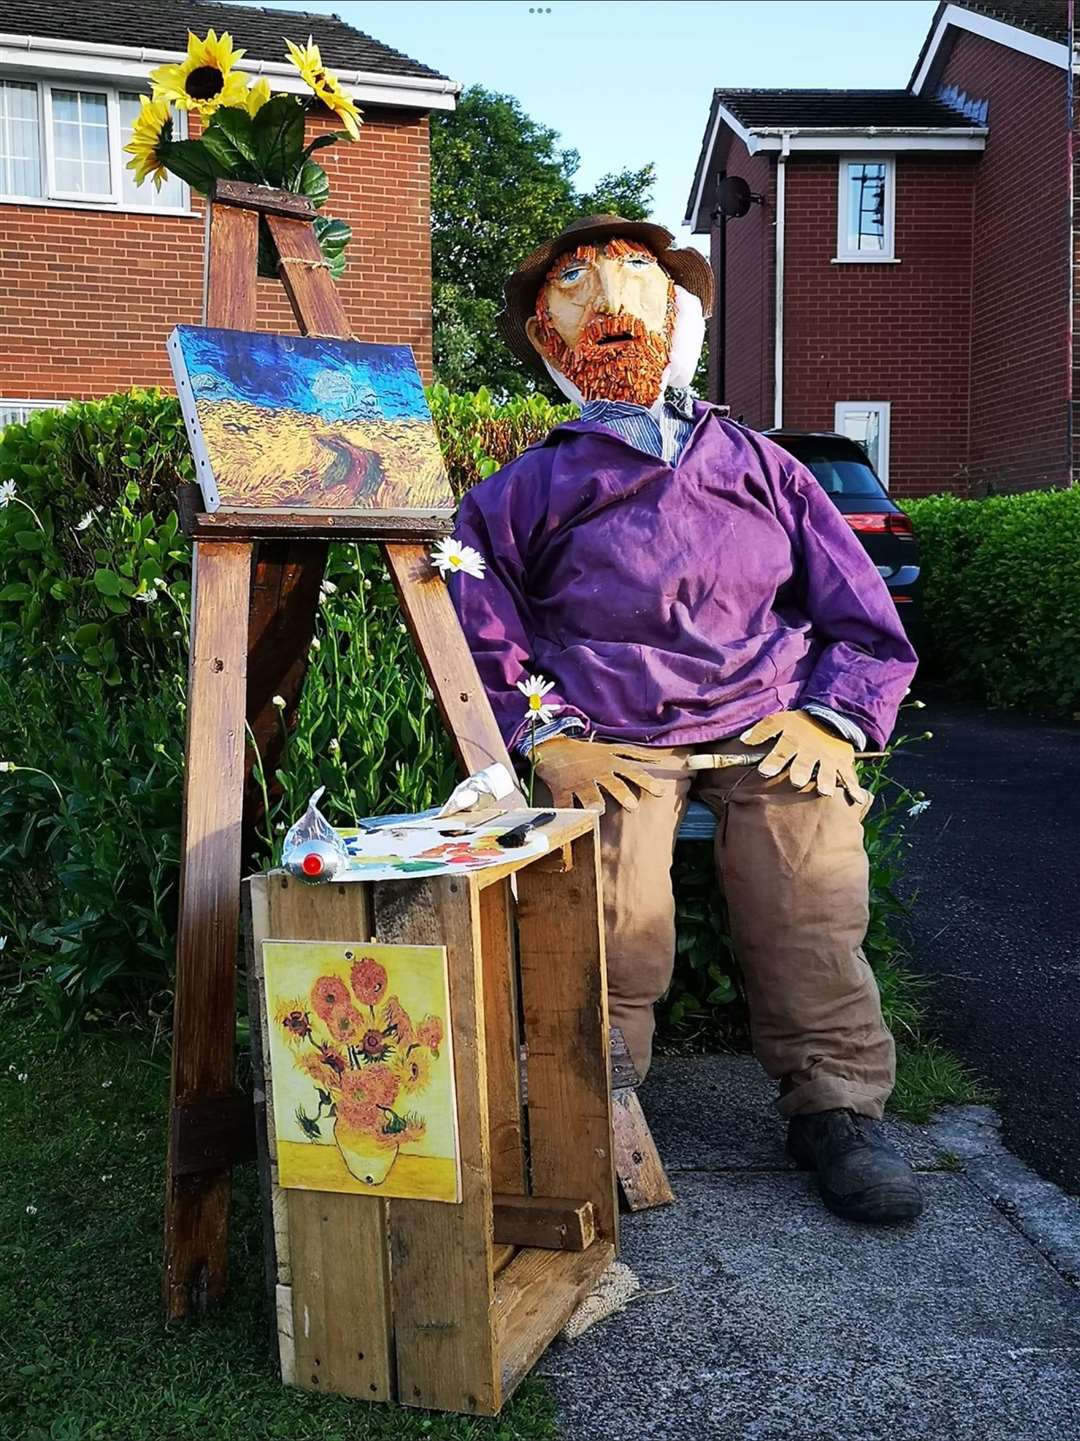 “A scarecrow figure of Vincent Van Gogh with his easel and table (Louise Henson/PA)